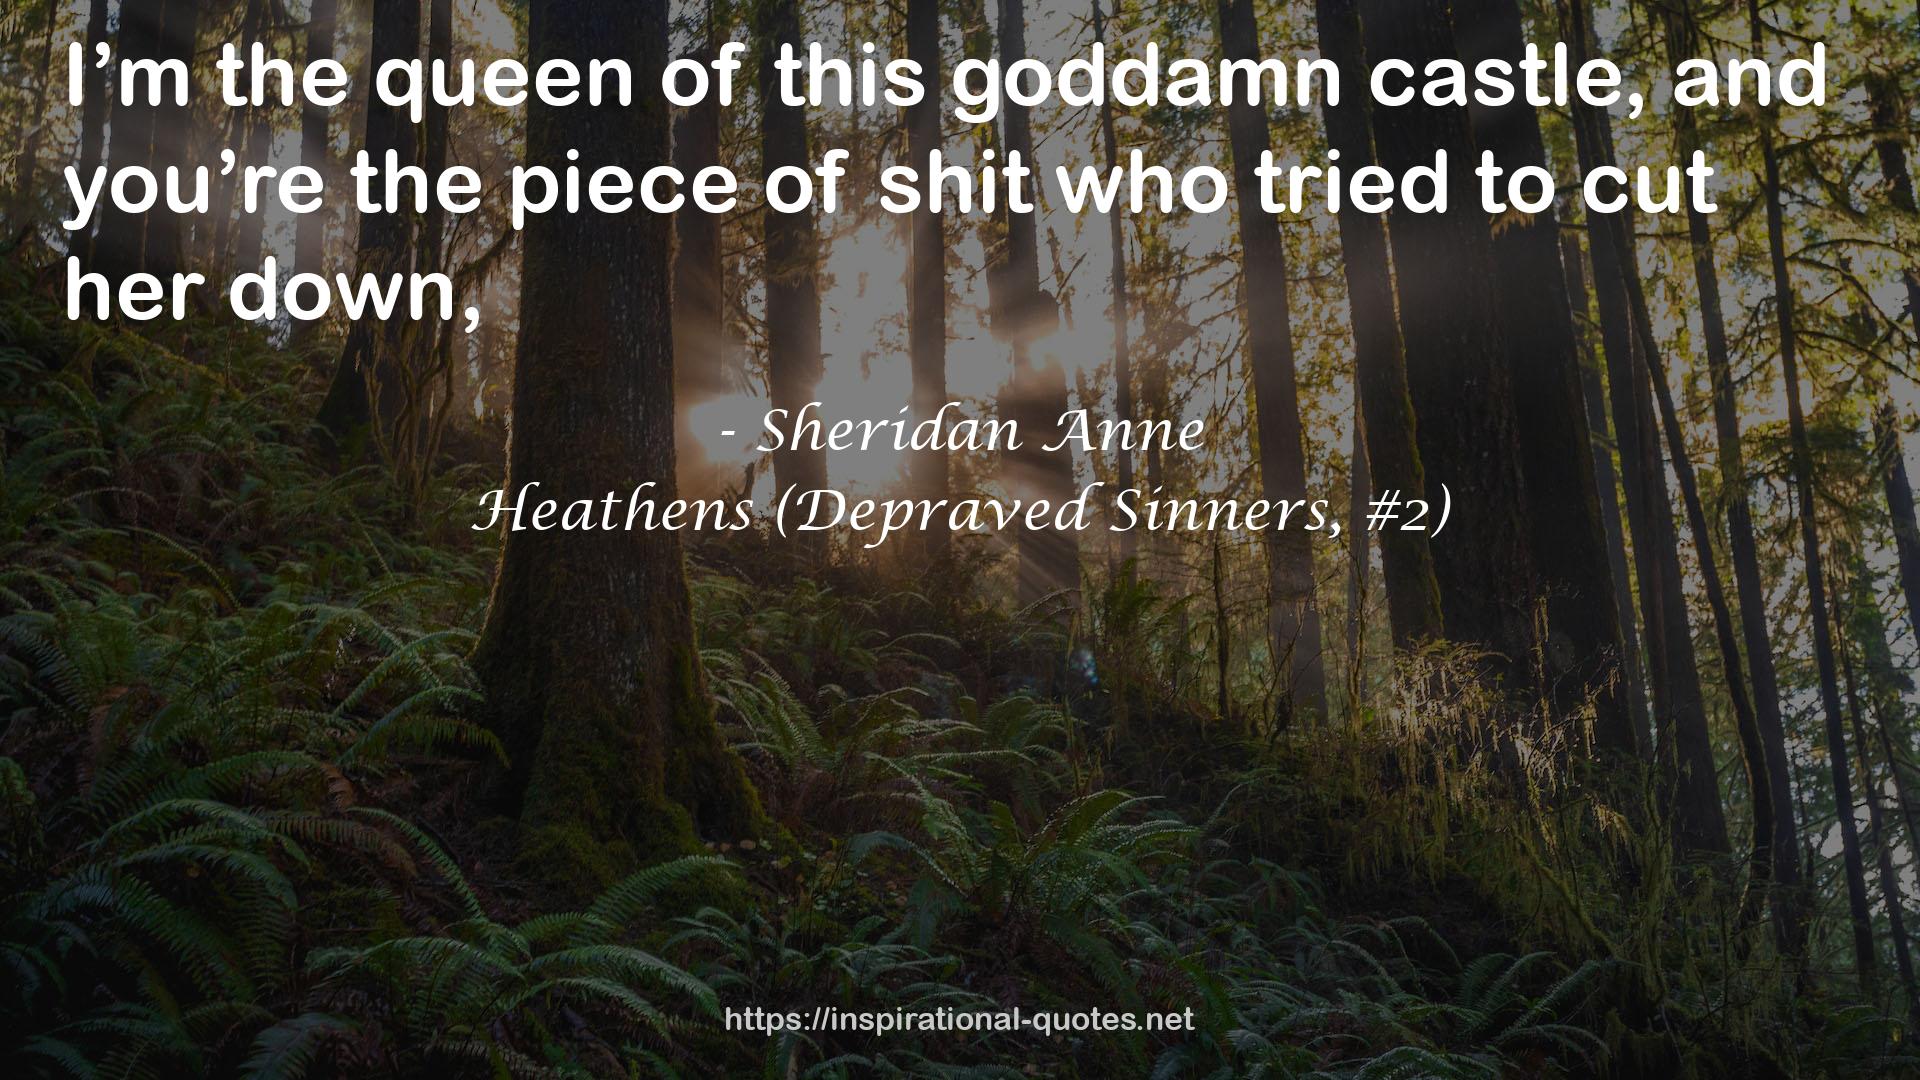 Heathens (Depraved Sinners, #2) QUOTES